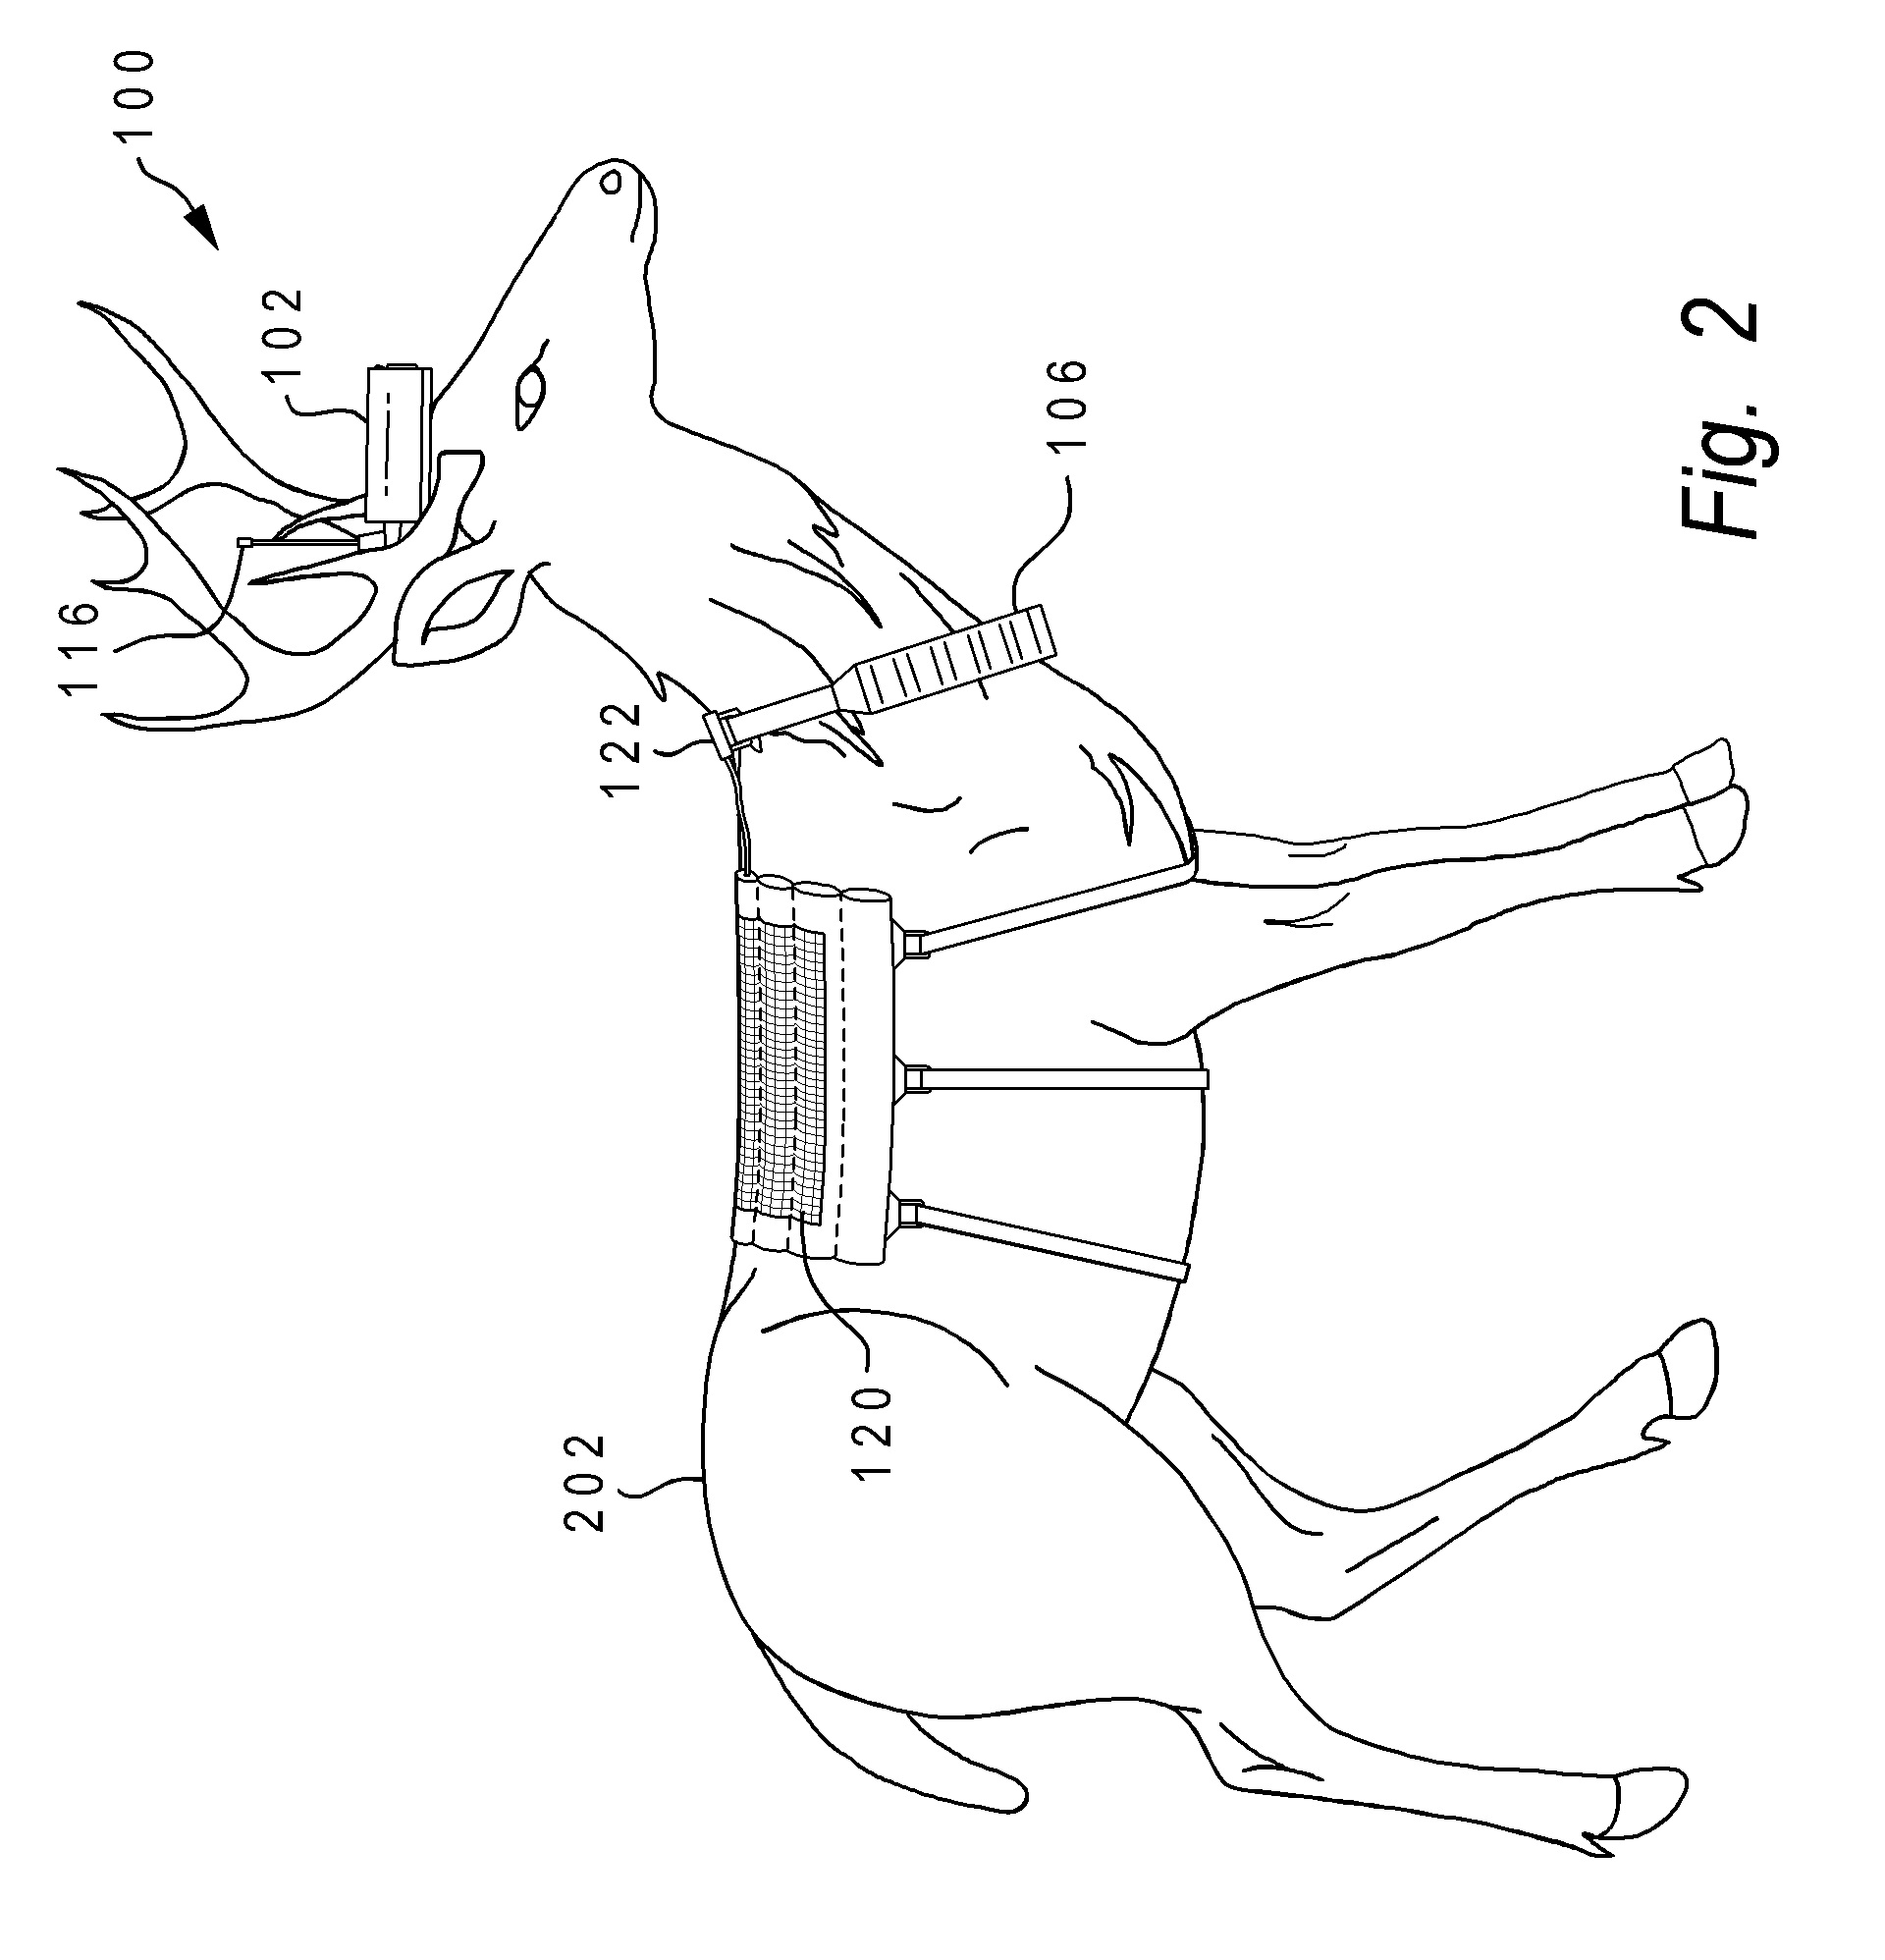 Method and apparatus for monitoring an animal in real time